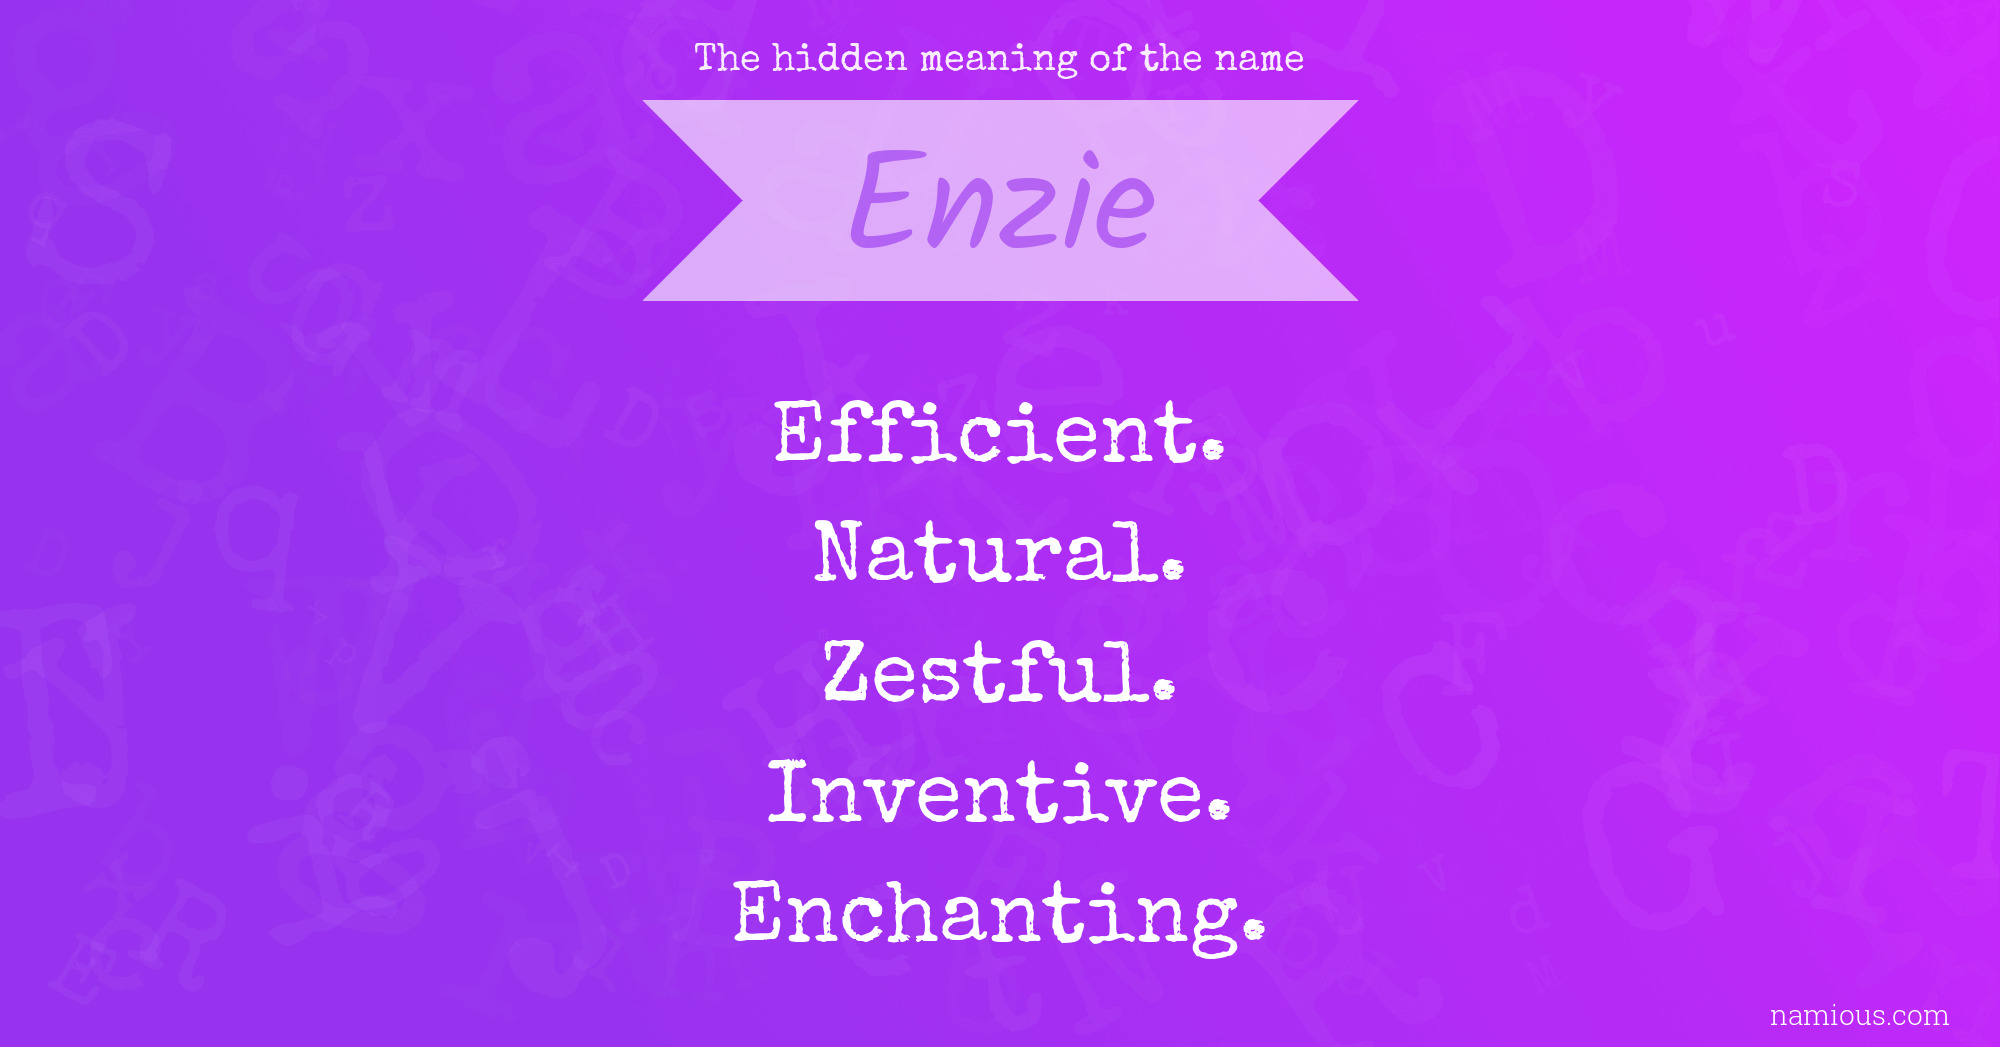 The hidden meaning of the name Enzie